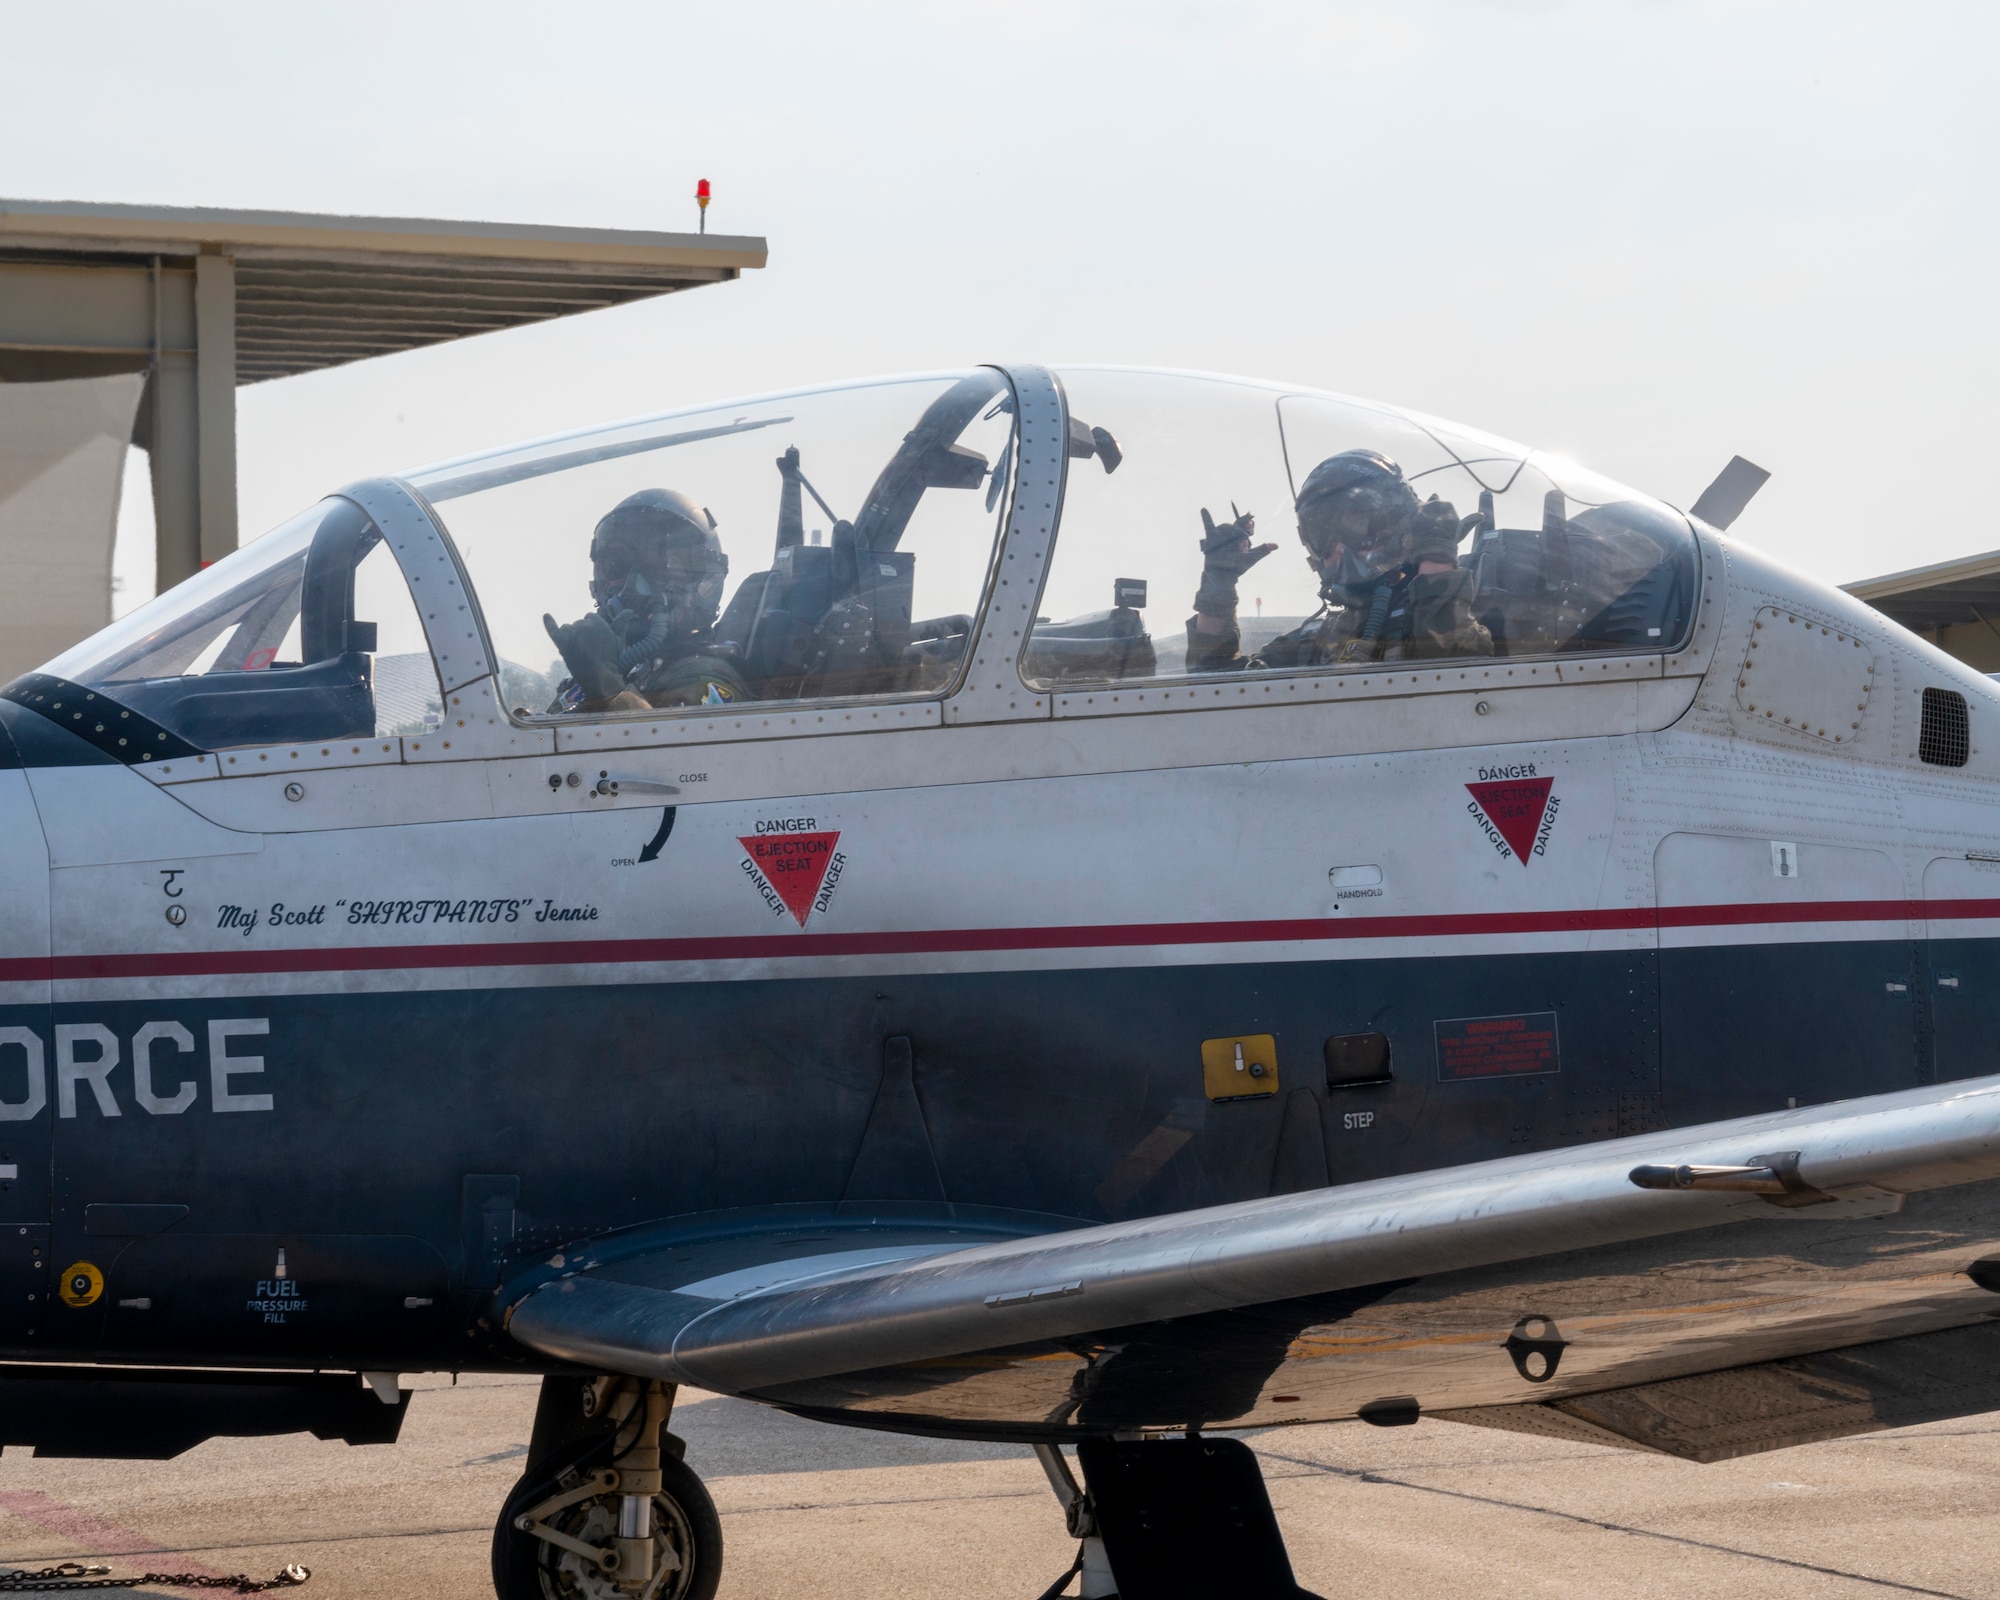 U.S. Air Force 2nd Lt. Christopher Ugale, a student pilot with the 47th Student Squadron, waves to the camera in the cockpit of a T-6 Texan II before his dollar flight with U.S. Air Force Capt. Sarah Fotsch at Laughlin Air Force Base, Texas on August 4, 2021. The Dollar Flight is the first flight in a real aircraft for a student pilot and marks a major milestone in the career of a pilot. (U.S. Air Force Photo by Senior Airman Nicholas Larsen)